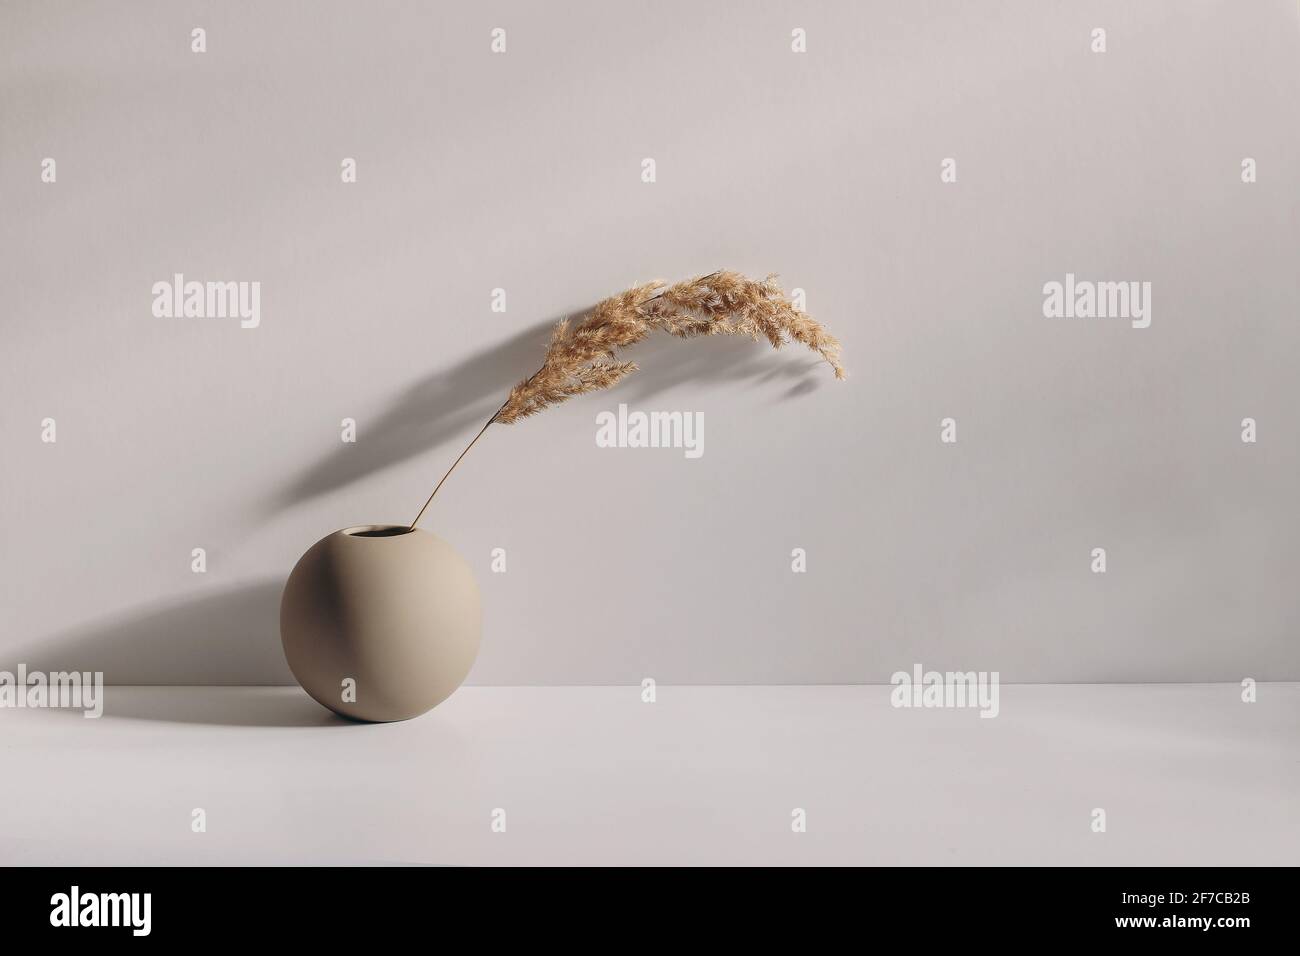 Modern summer, fall still life photo. Beige ball shaped vase with dry festuca grass in sunlight with long shadows. Beige table wall background. Empty Stock Photo